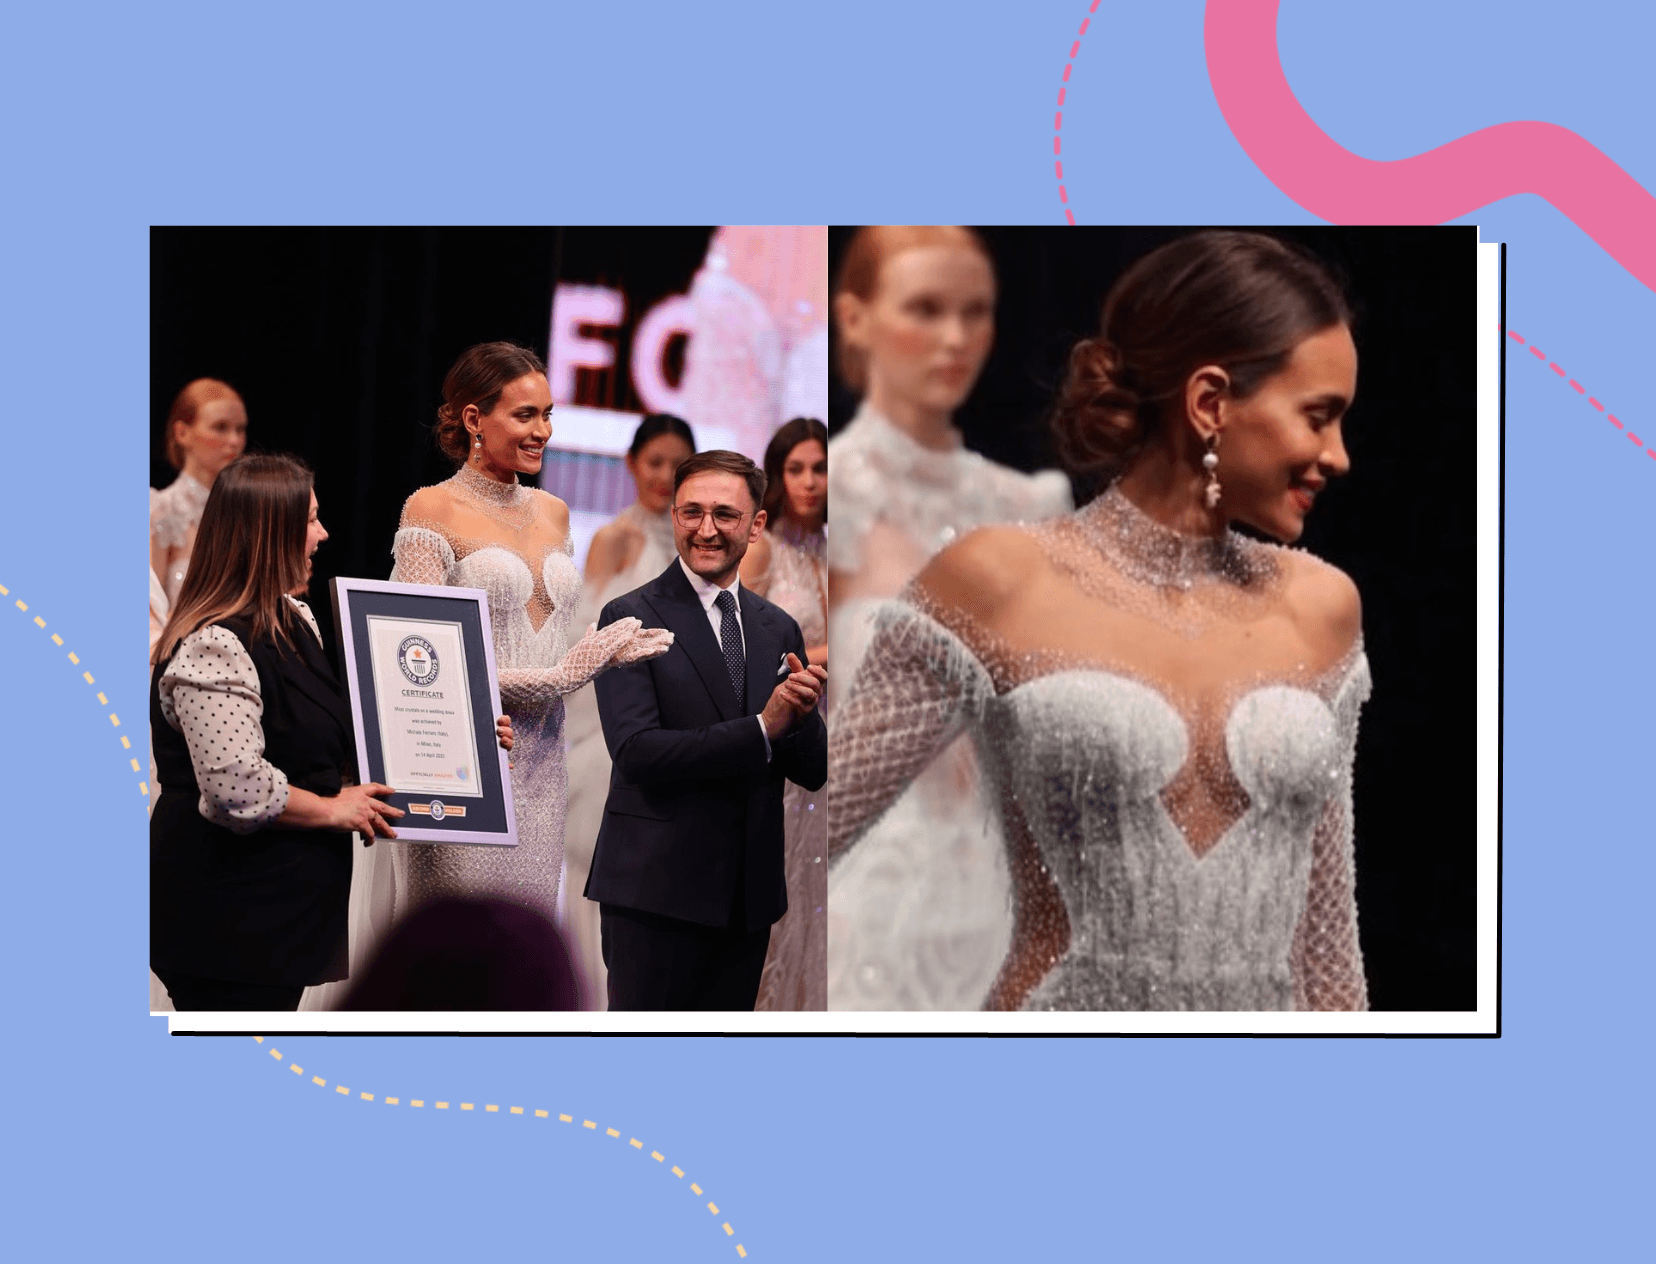 Wedding Dress With More Than 50,000 Swarovski Crystals Breaks The Guinness World Record!